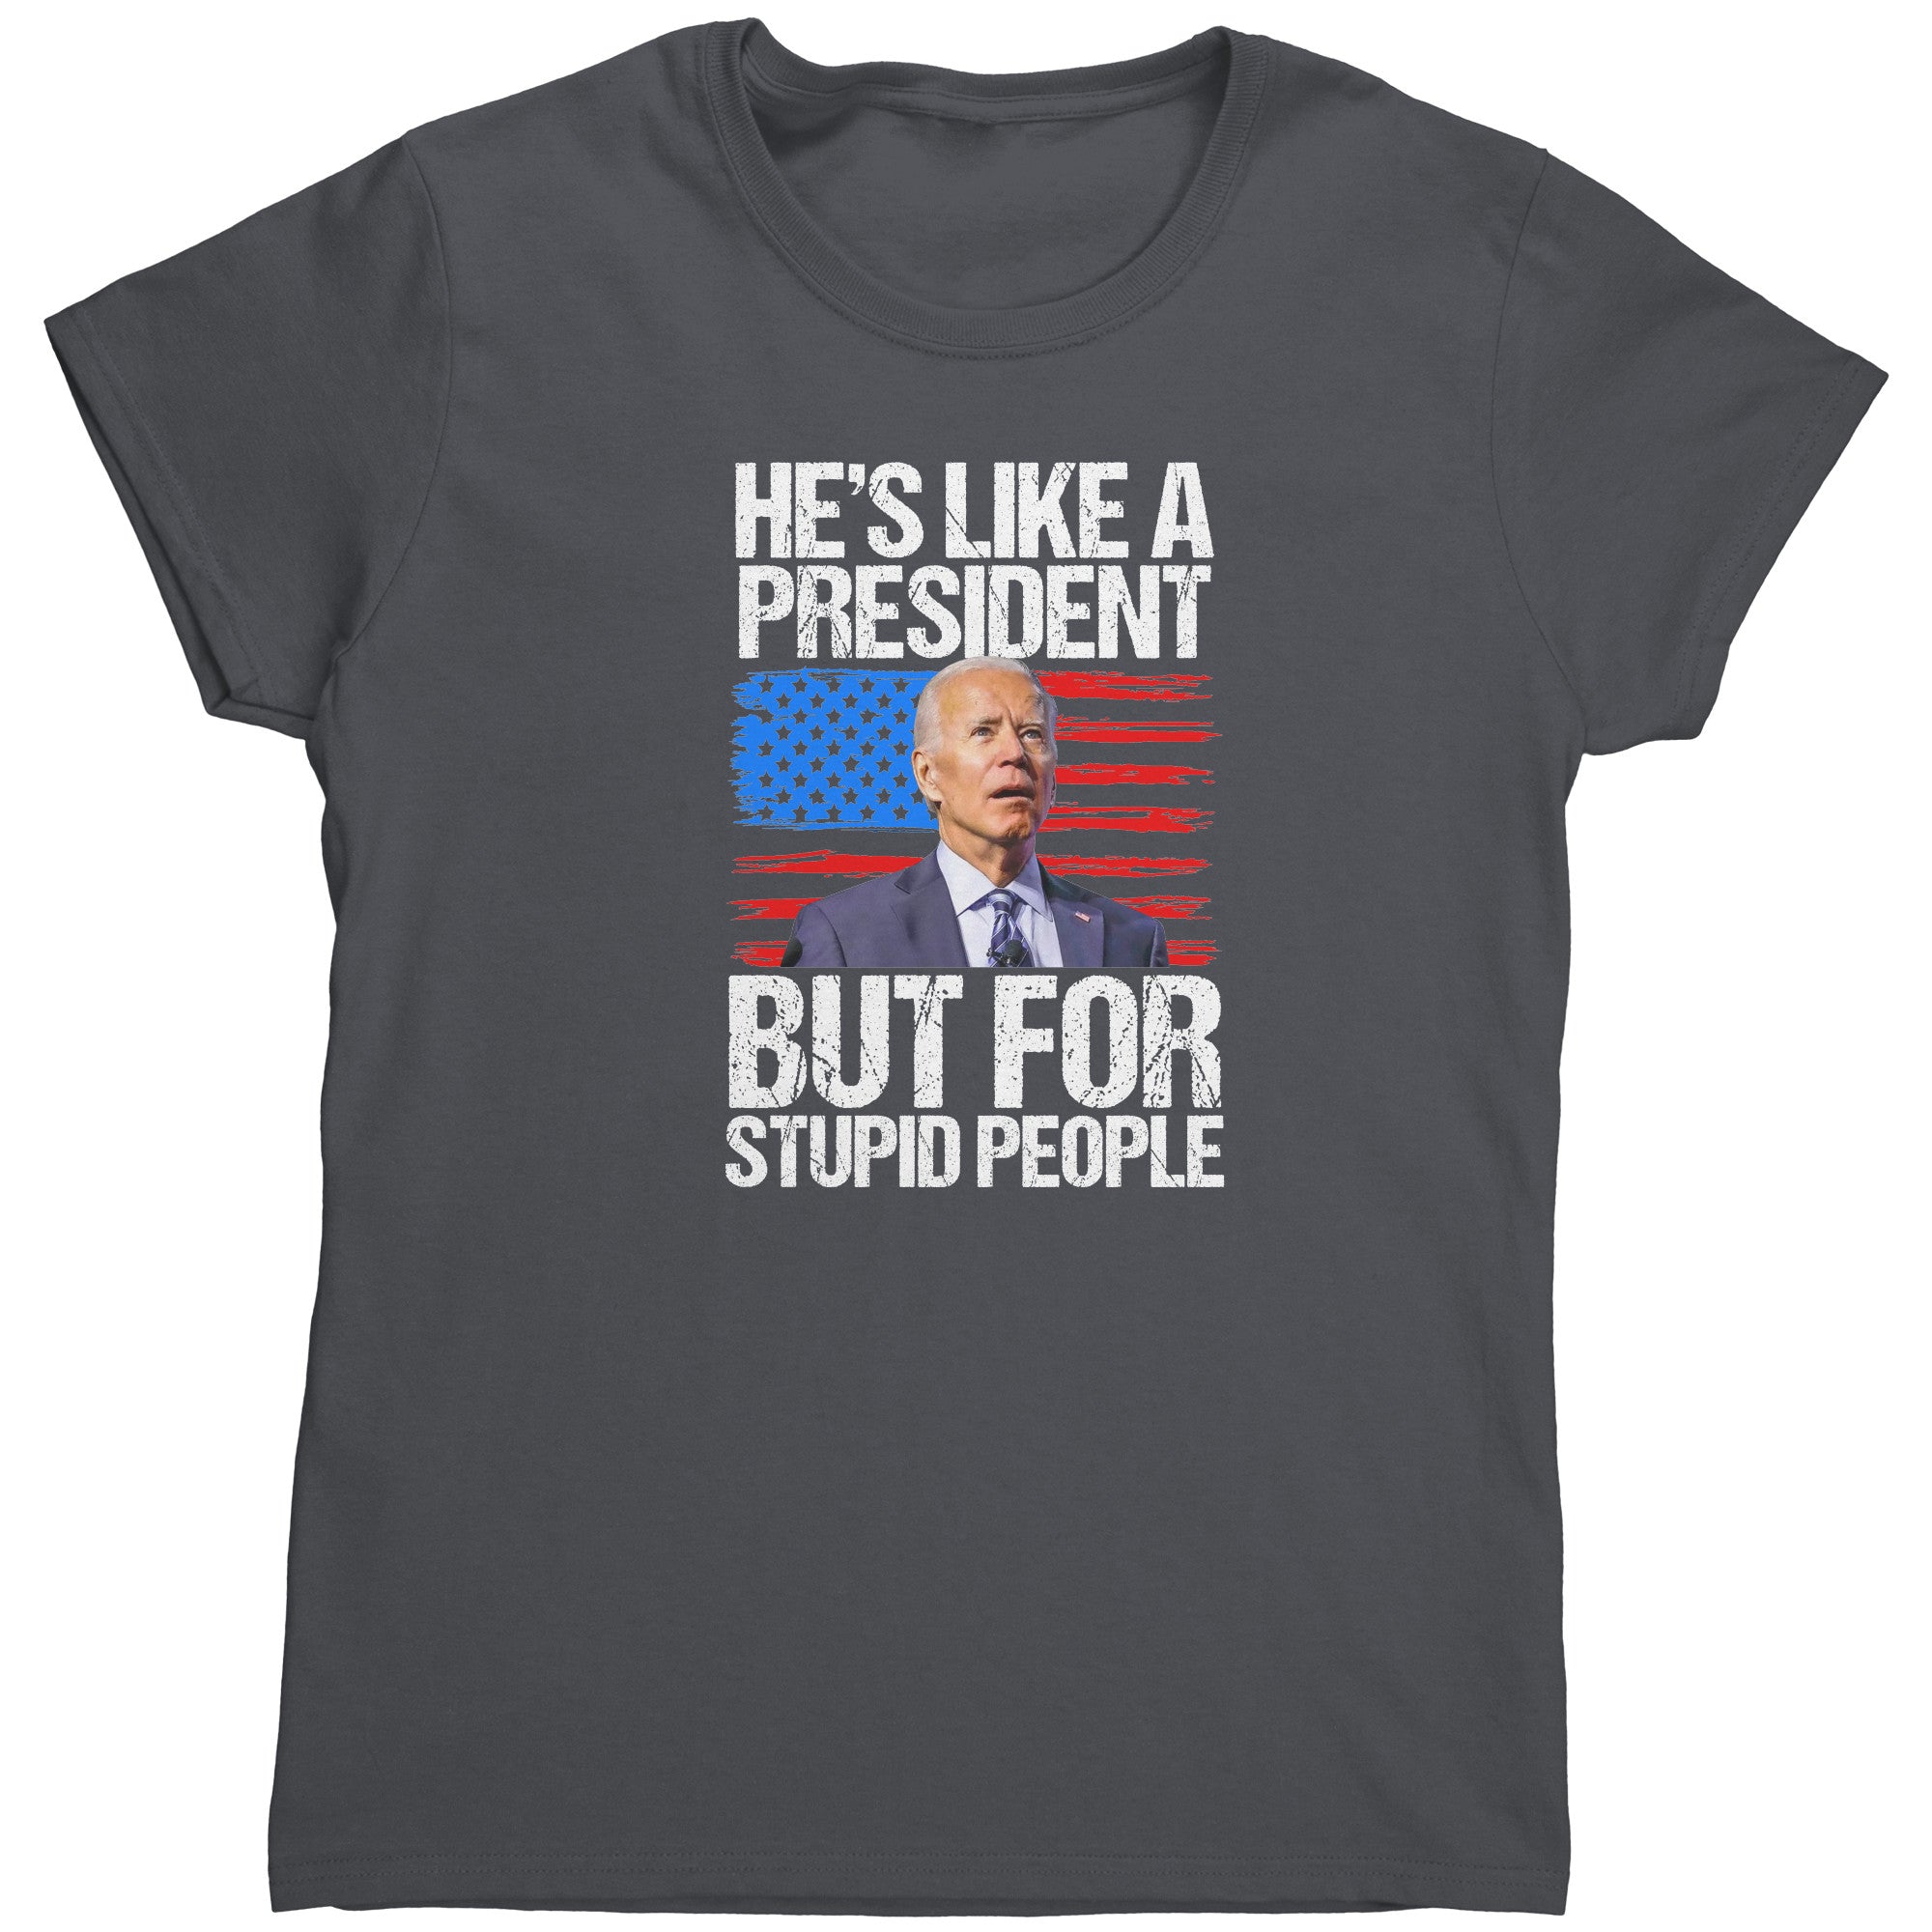 He's Like A President But For Stupid People (Ladies) -Apparel | Drunk America 